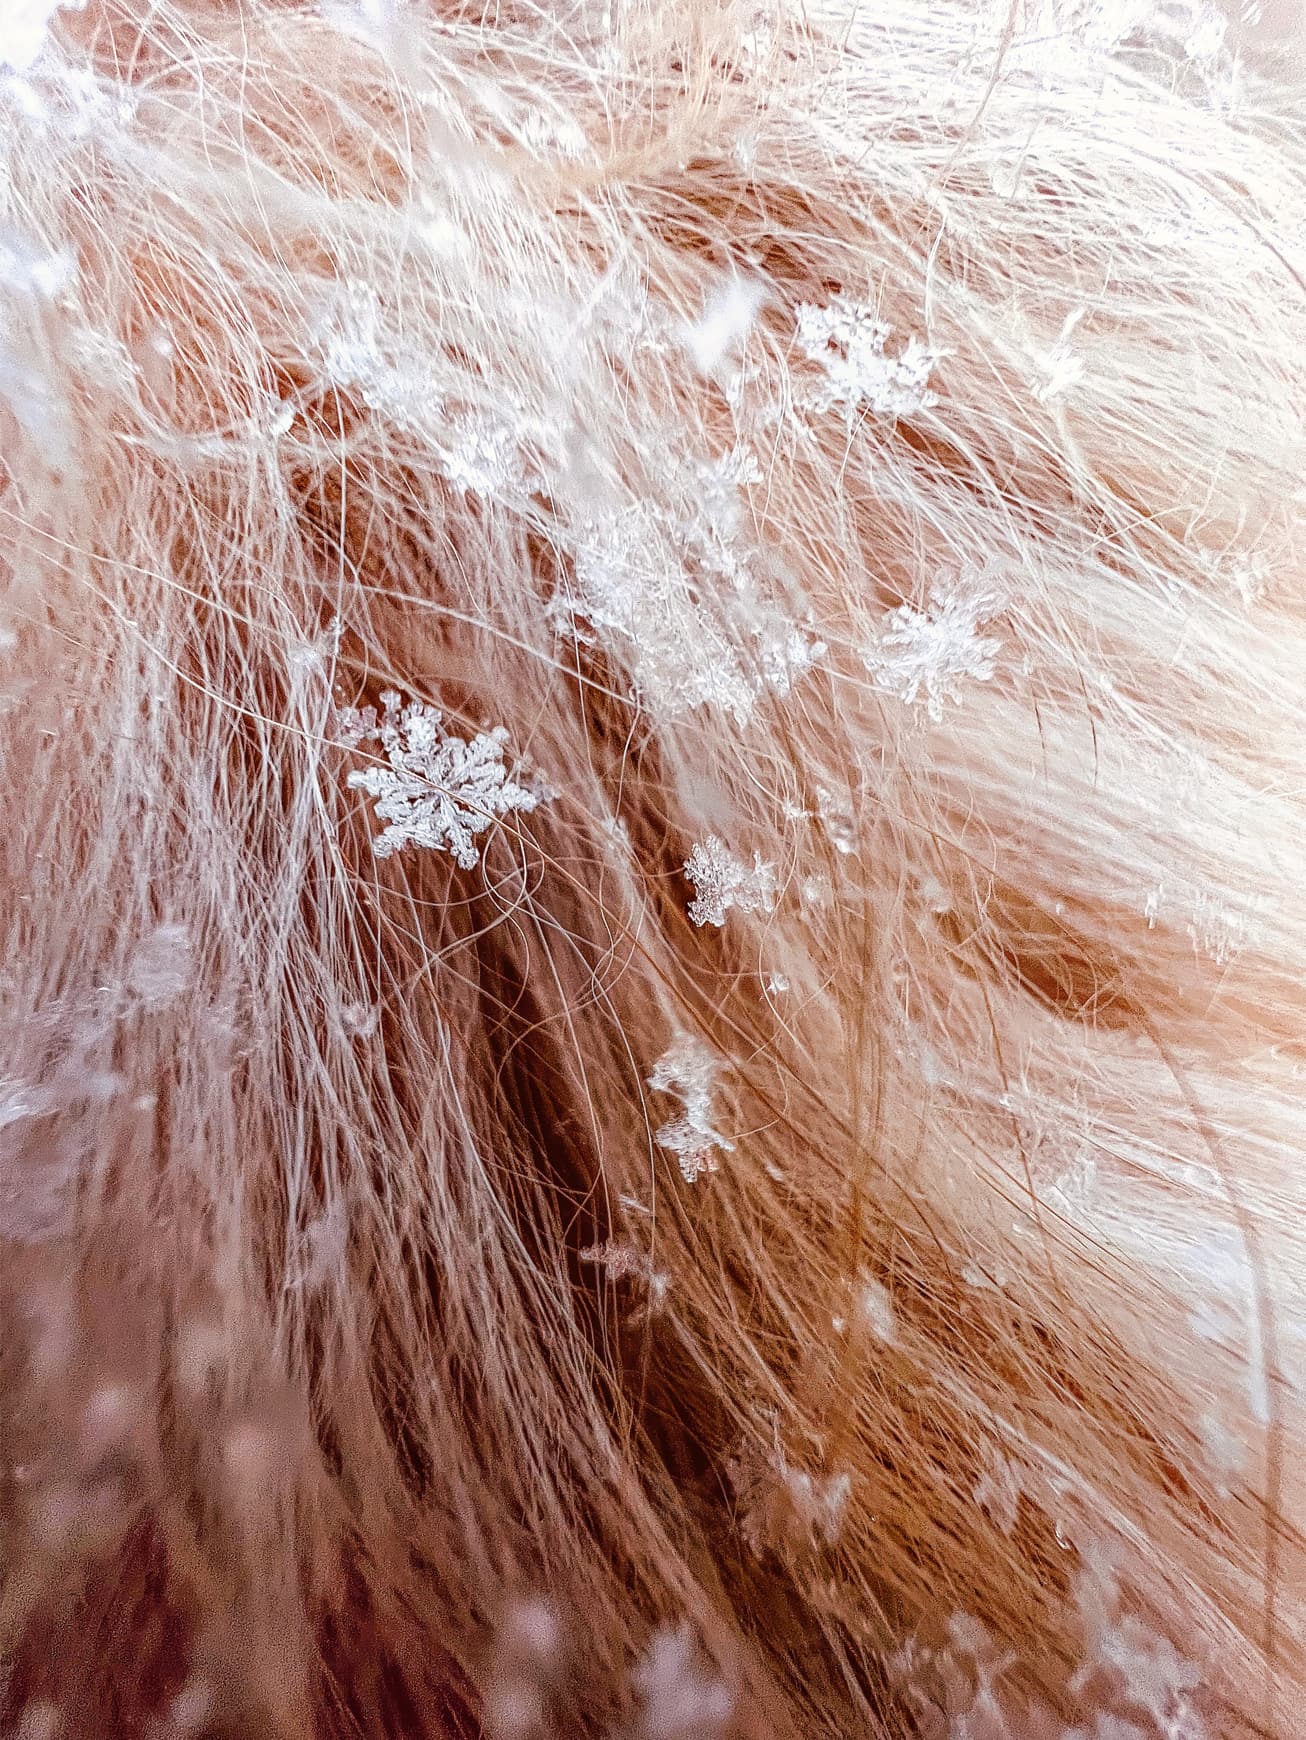 “Honeycomb” (snowflakes on dog hair) by Tom Reeves (@tomreevesphoto). Shot on iPhone 13 Pro.